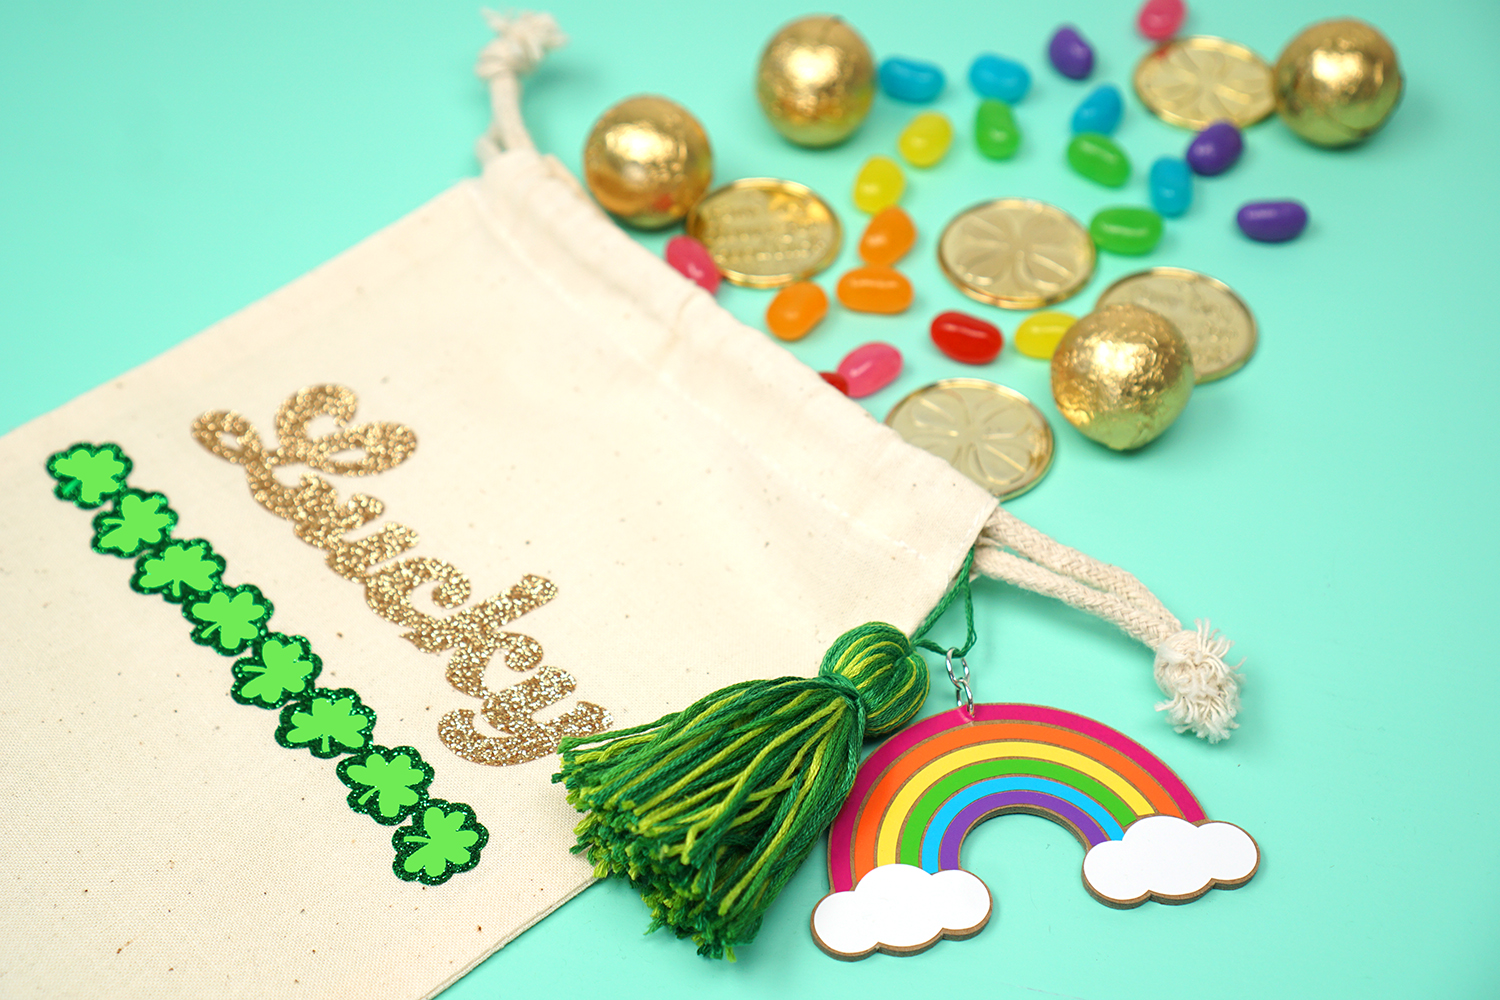 treat bag for st patricks day with gold coins and candies